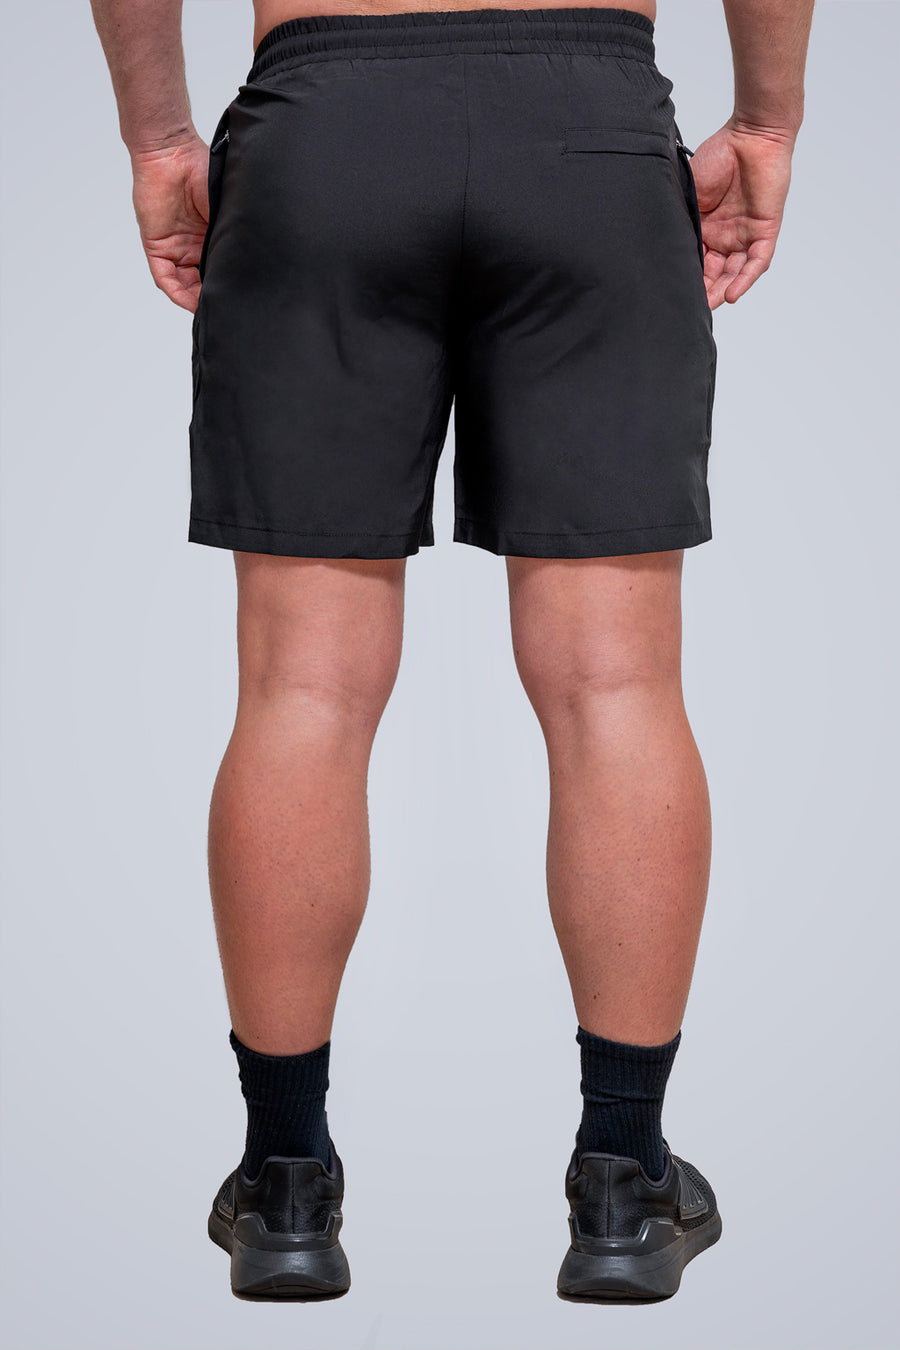 Men's Function One 7 Inch Shorts Black